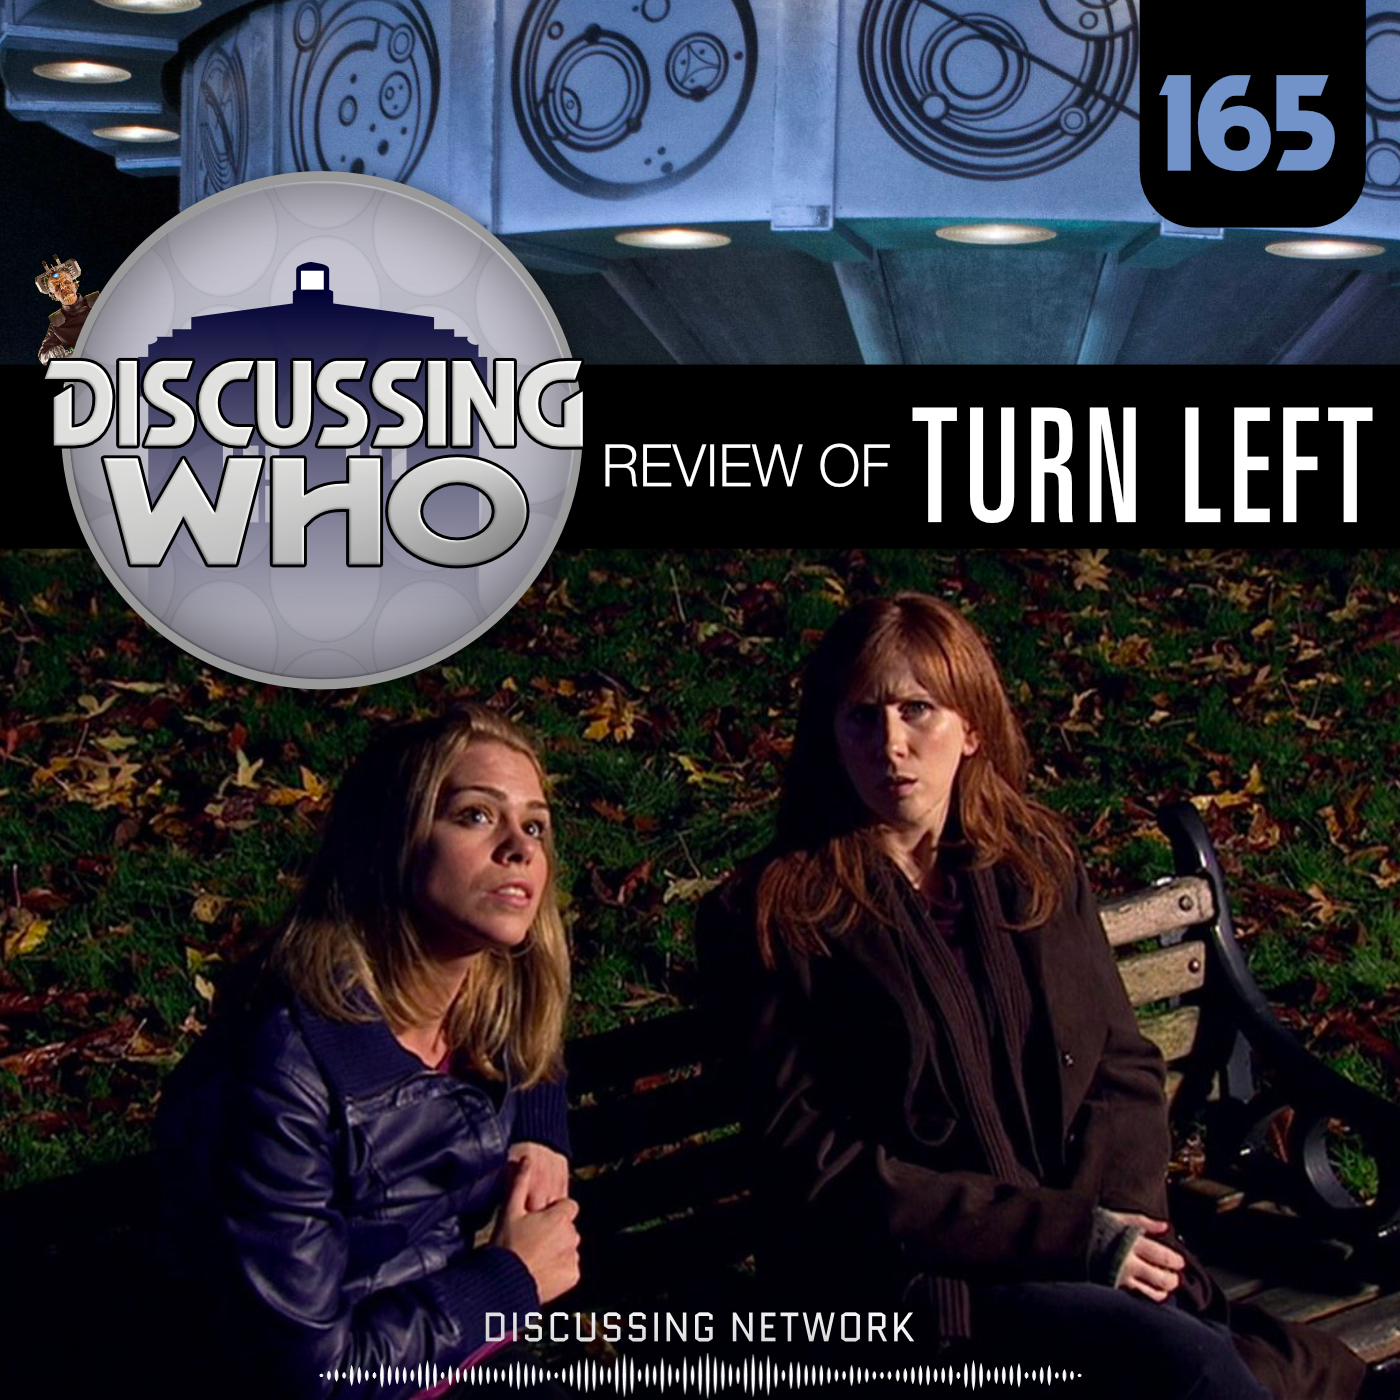 Discussing Who Episode 165 Review of Turn Left Doctor Who